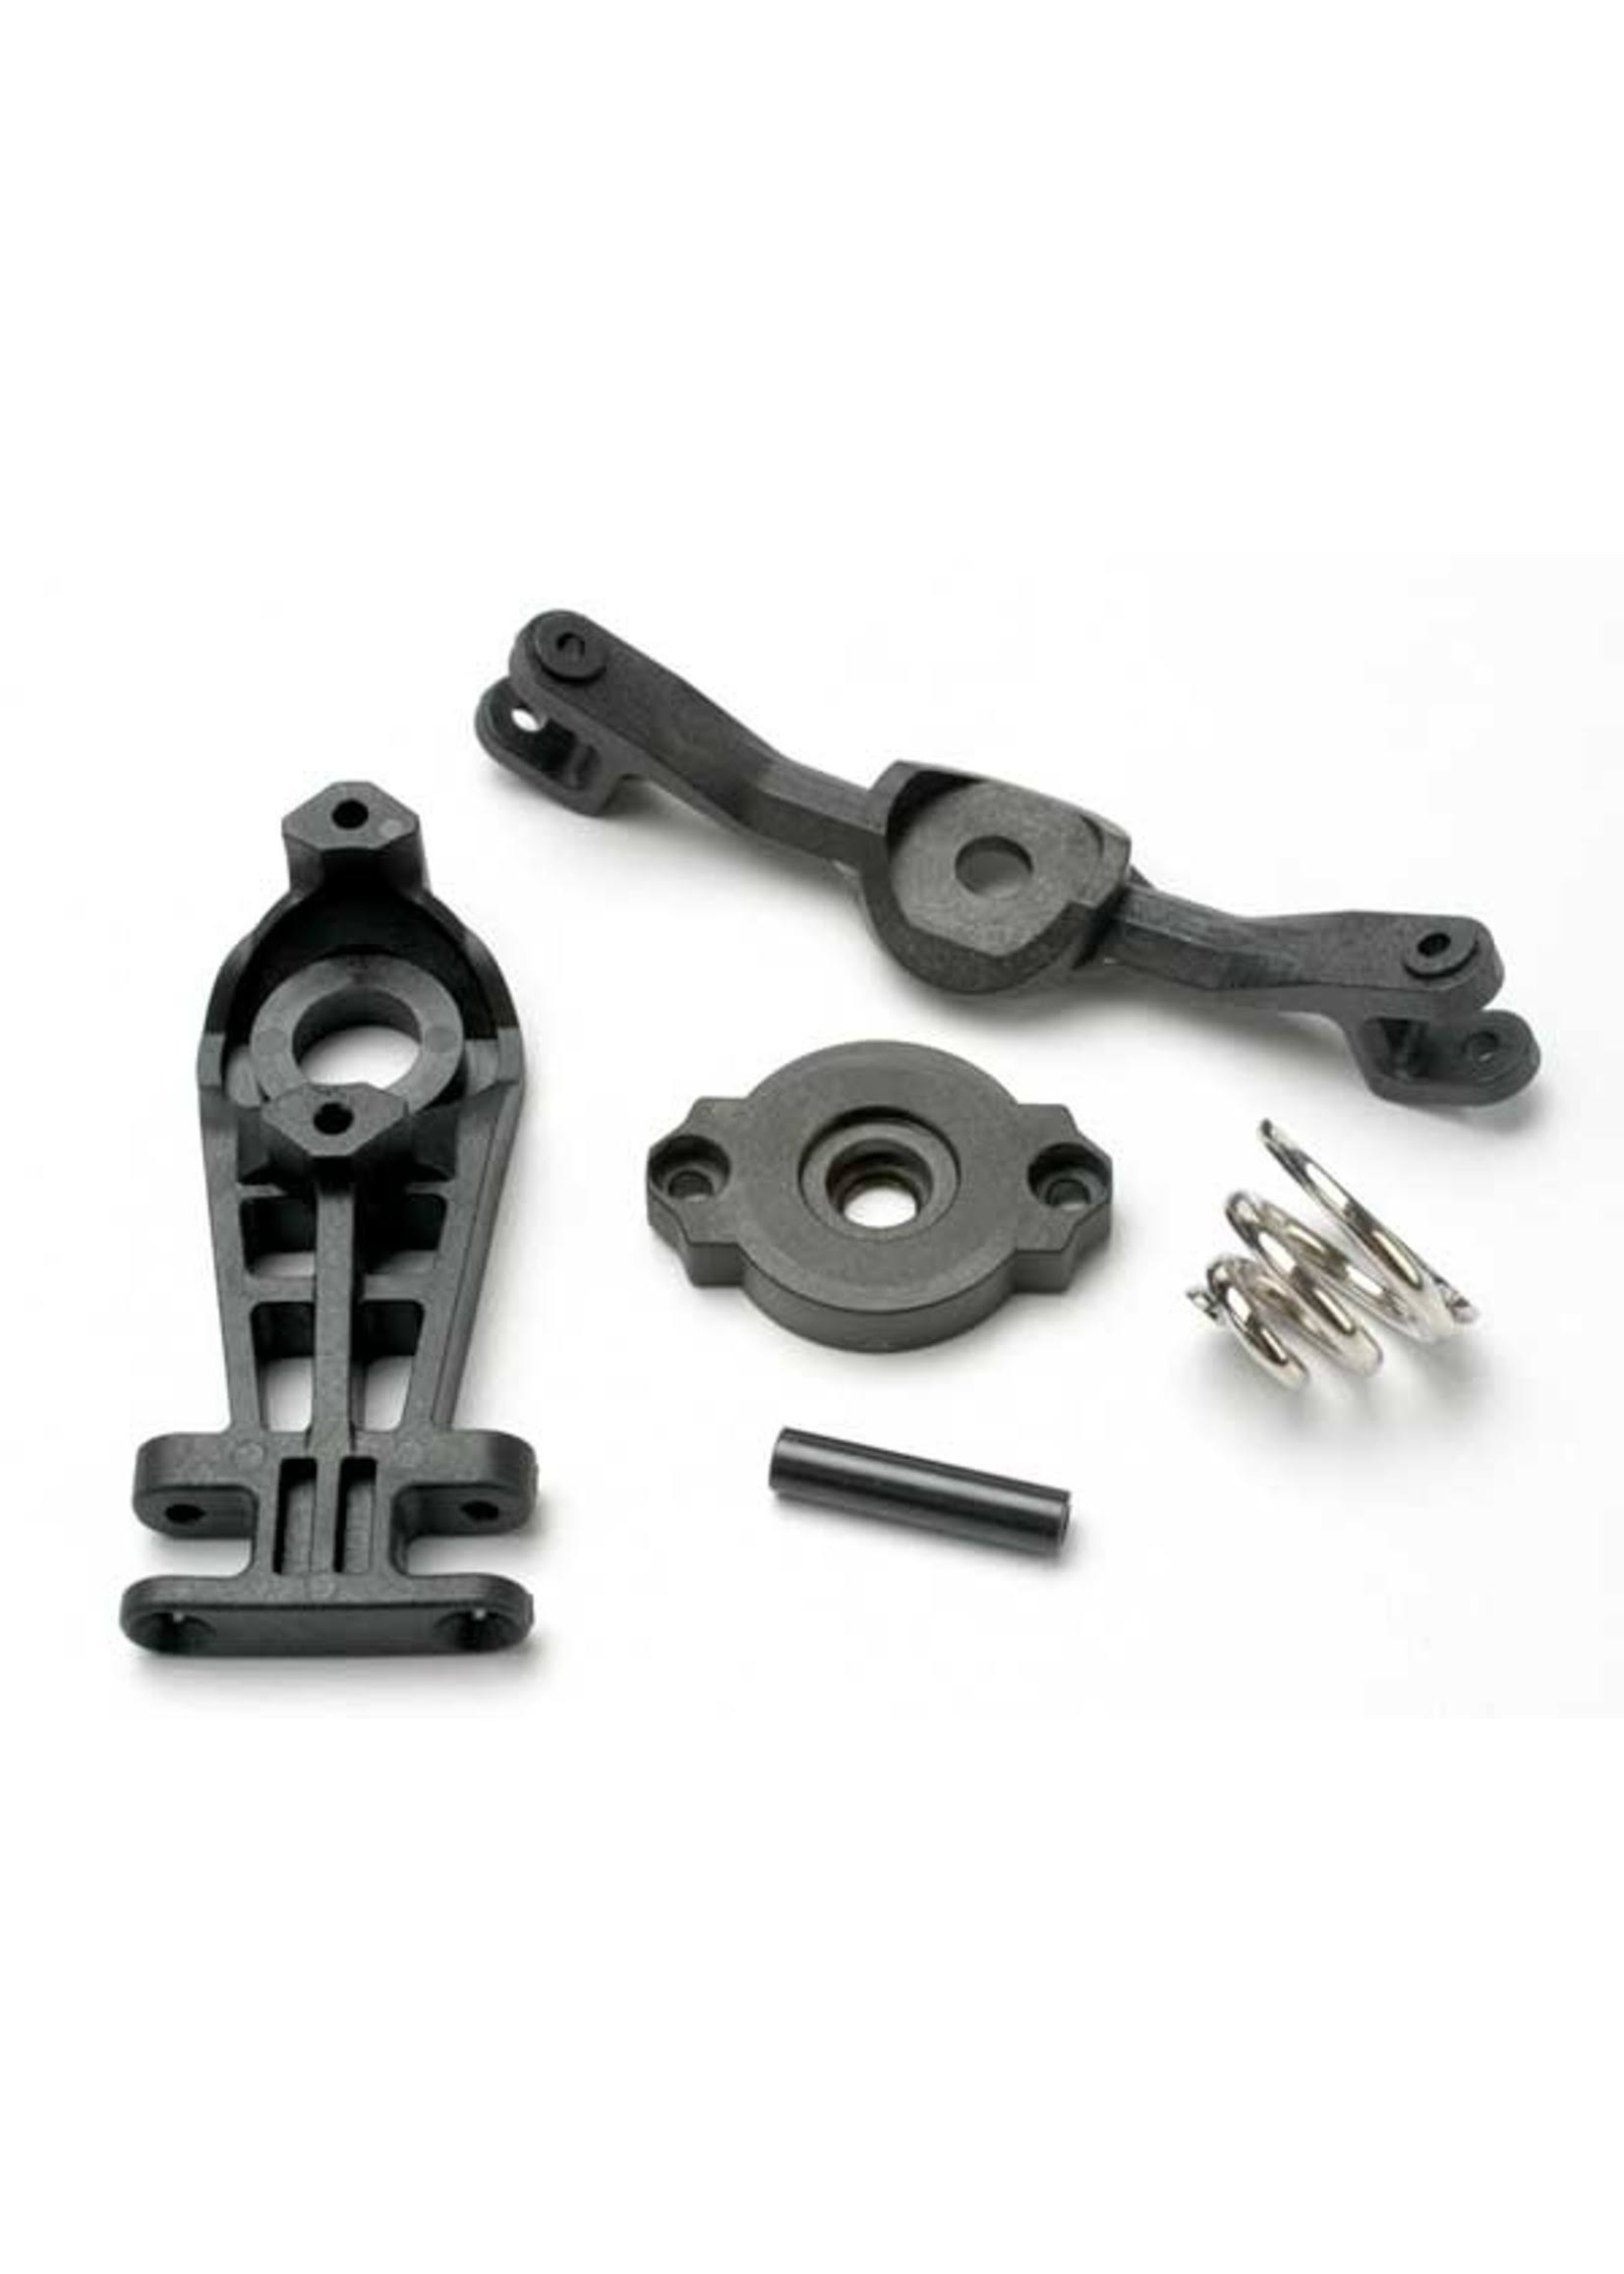 Traxxas 5344 Upper And Lower Steering Arm